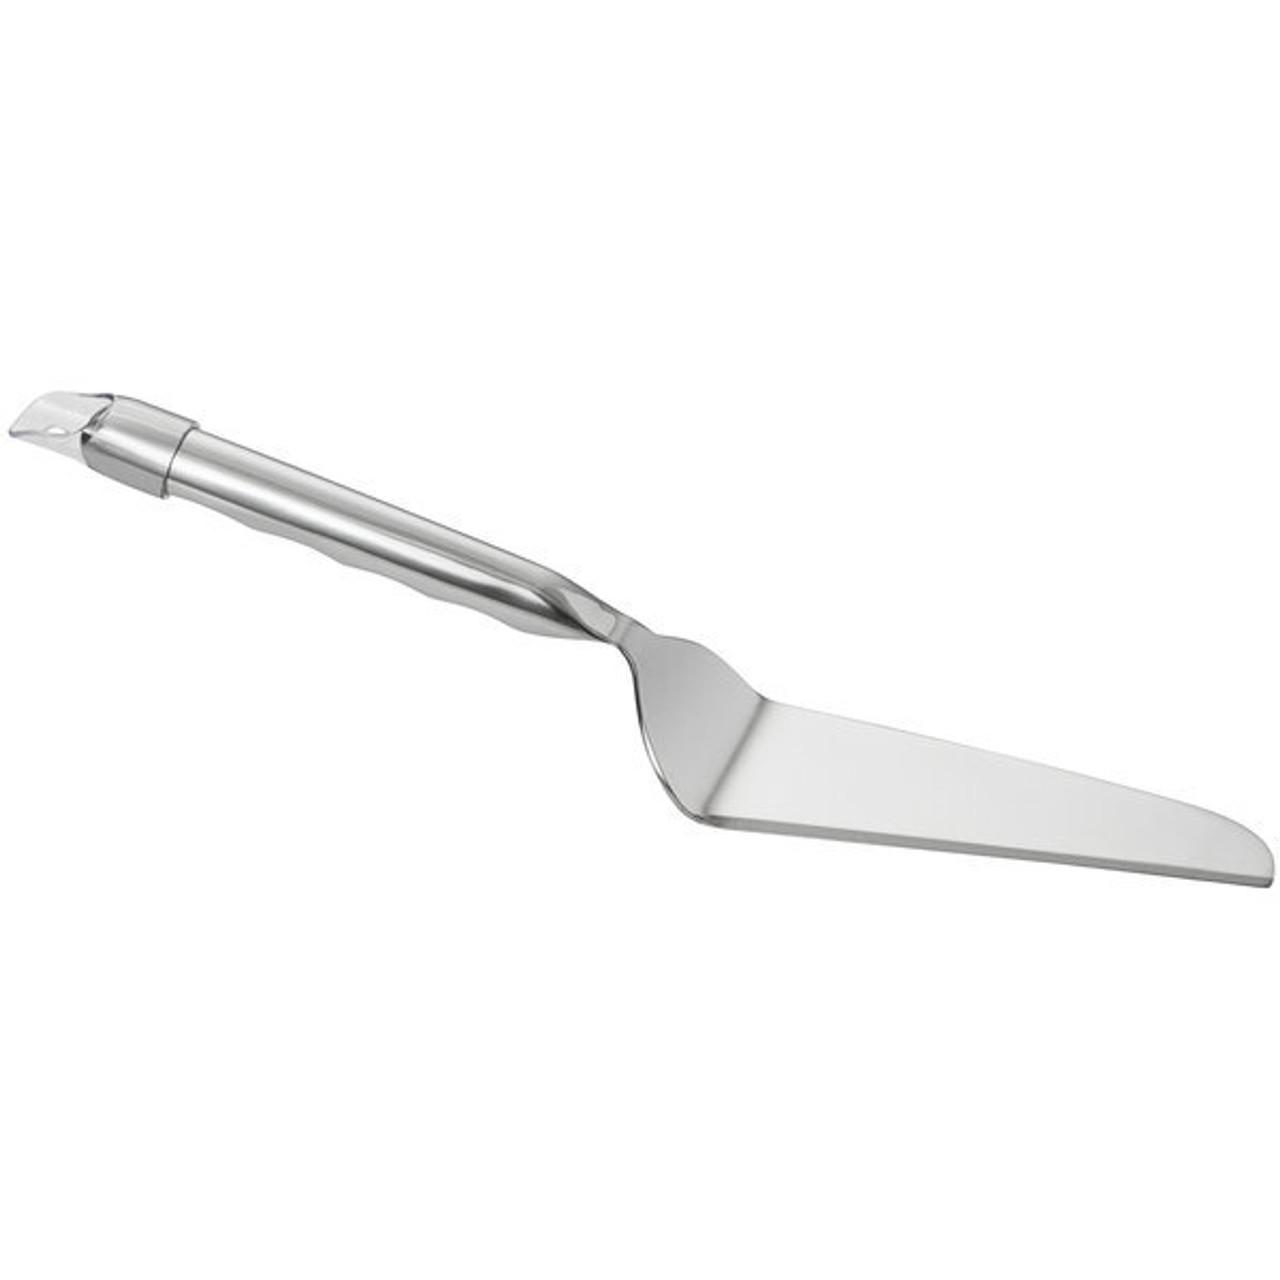 Hollow Stainless Steel Handle Wide Cake Server